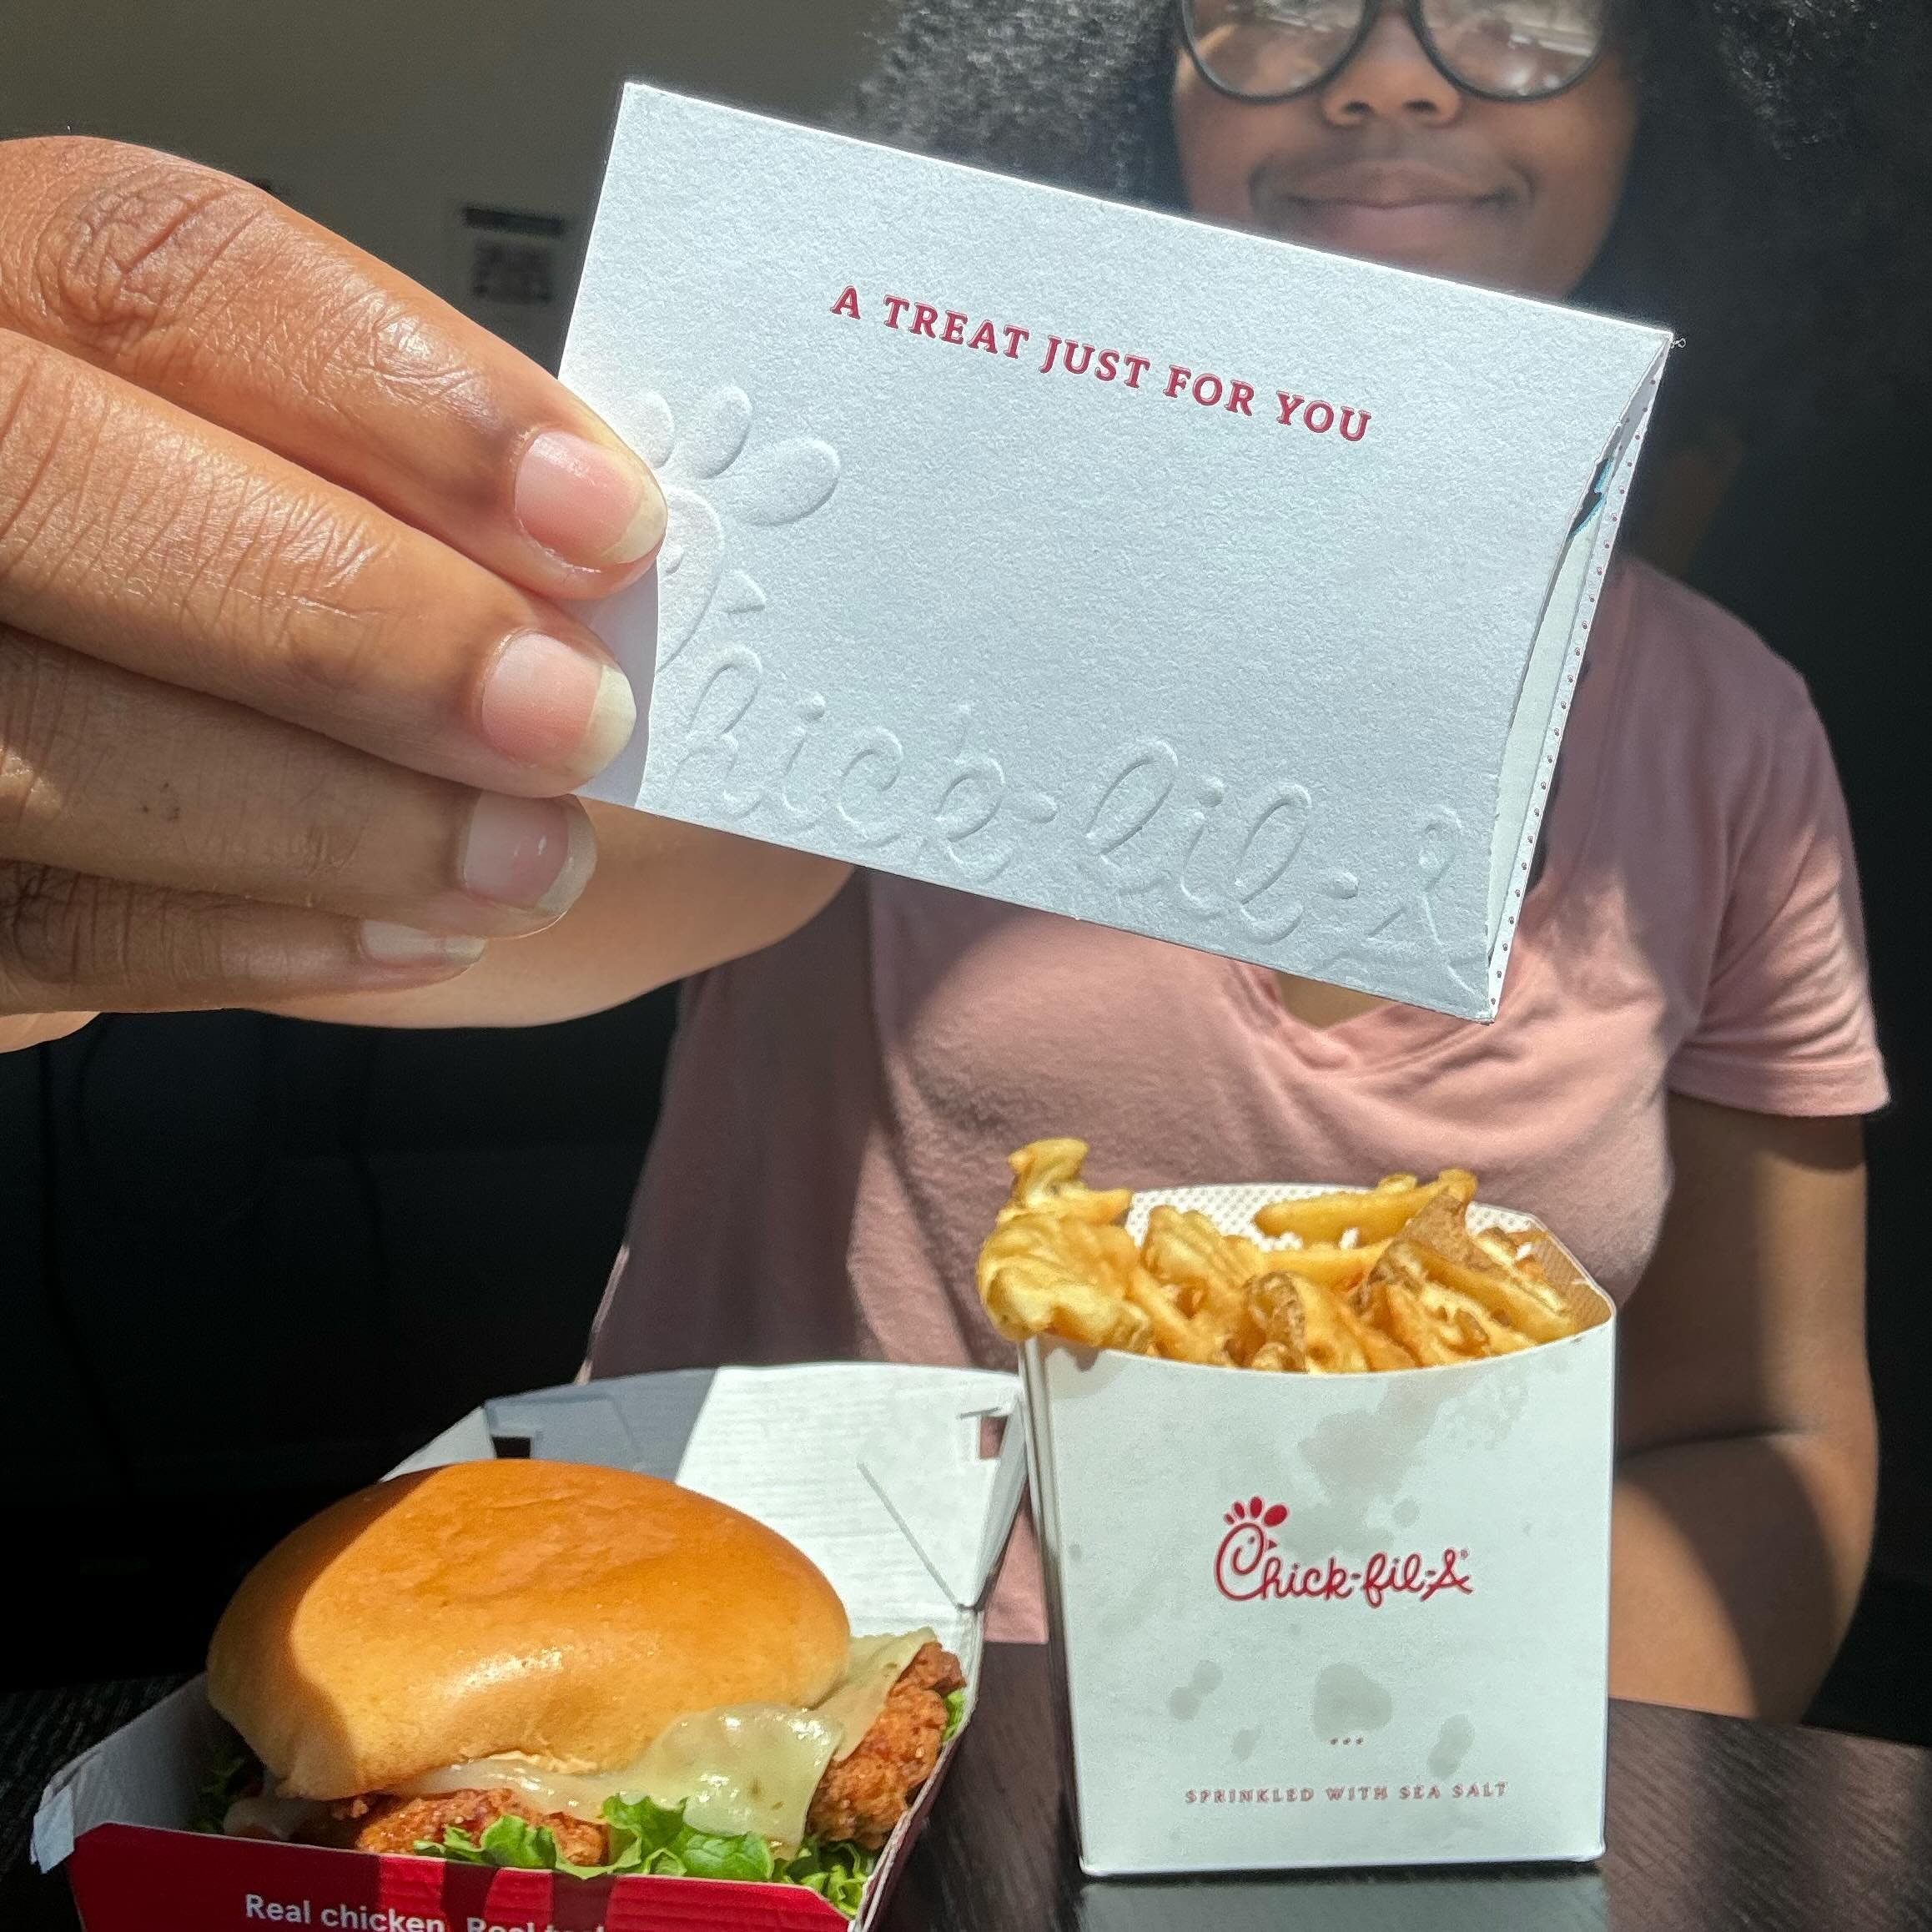 WIN IT WEDNESDAY ‼️

Enter to win a $25.00 gift card to Chick-Fil-A

Here are the steps to enter in :

1.  Like the post
2. Follow our Instagram 
3. Follow our TikTok @ everlyontheloopapts
3. Comment below when done &ldquo; WIN IT WEDNESDAY! &ldquo;
